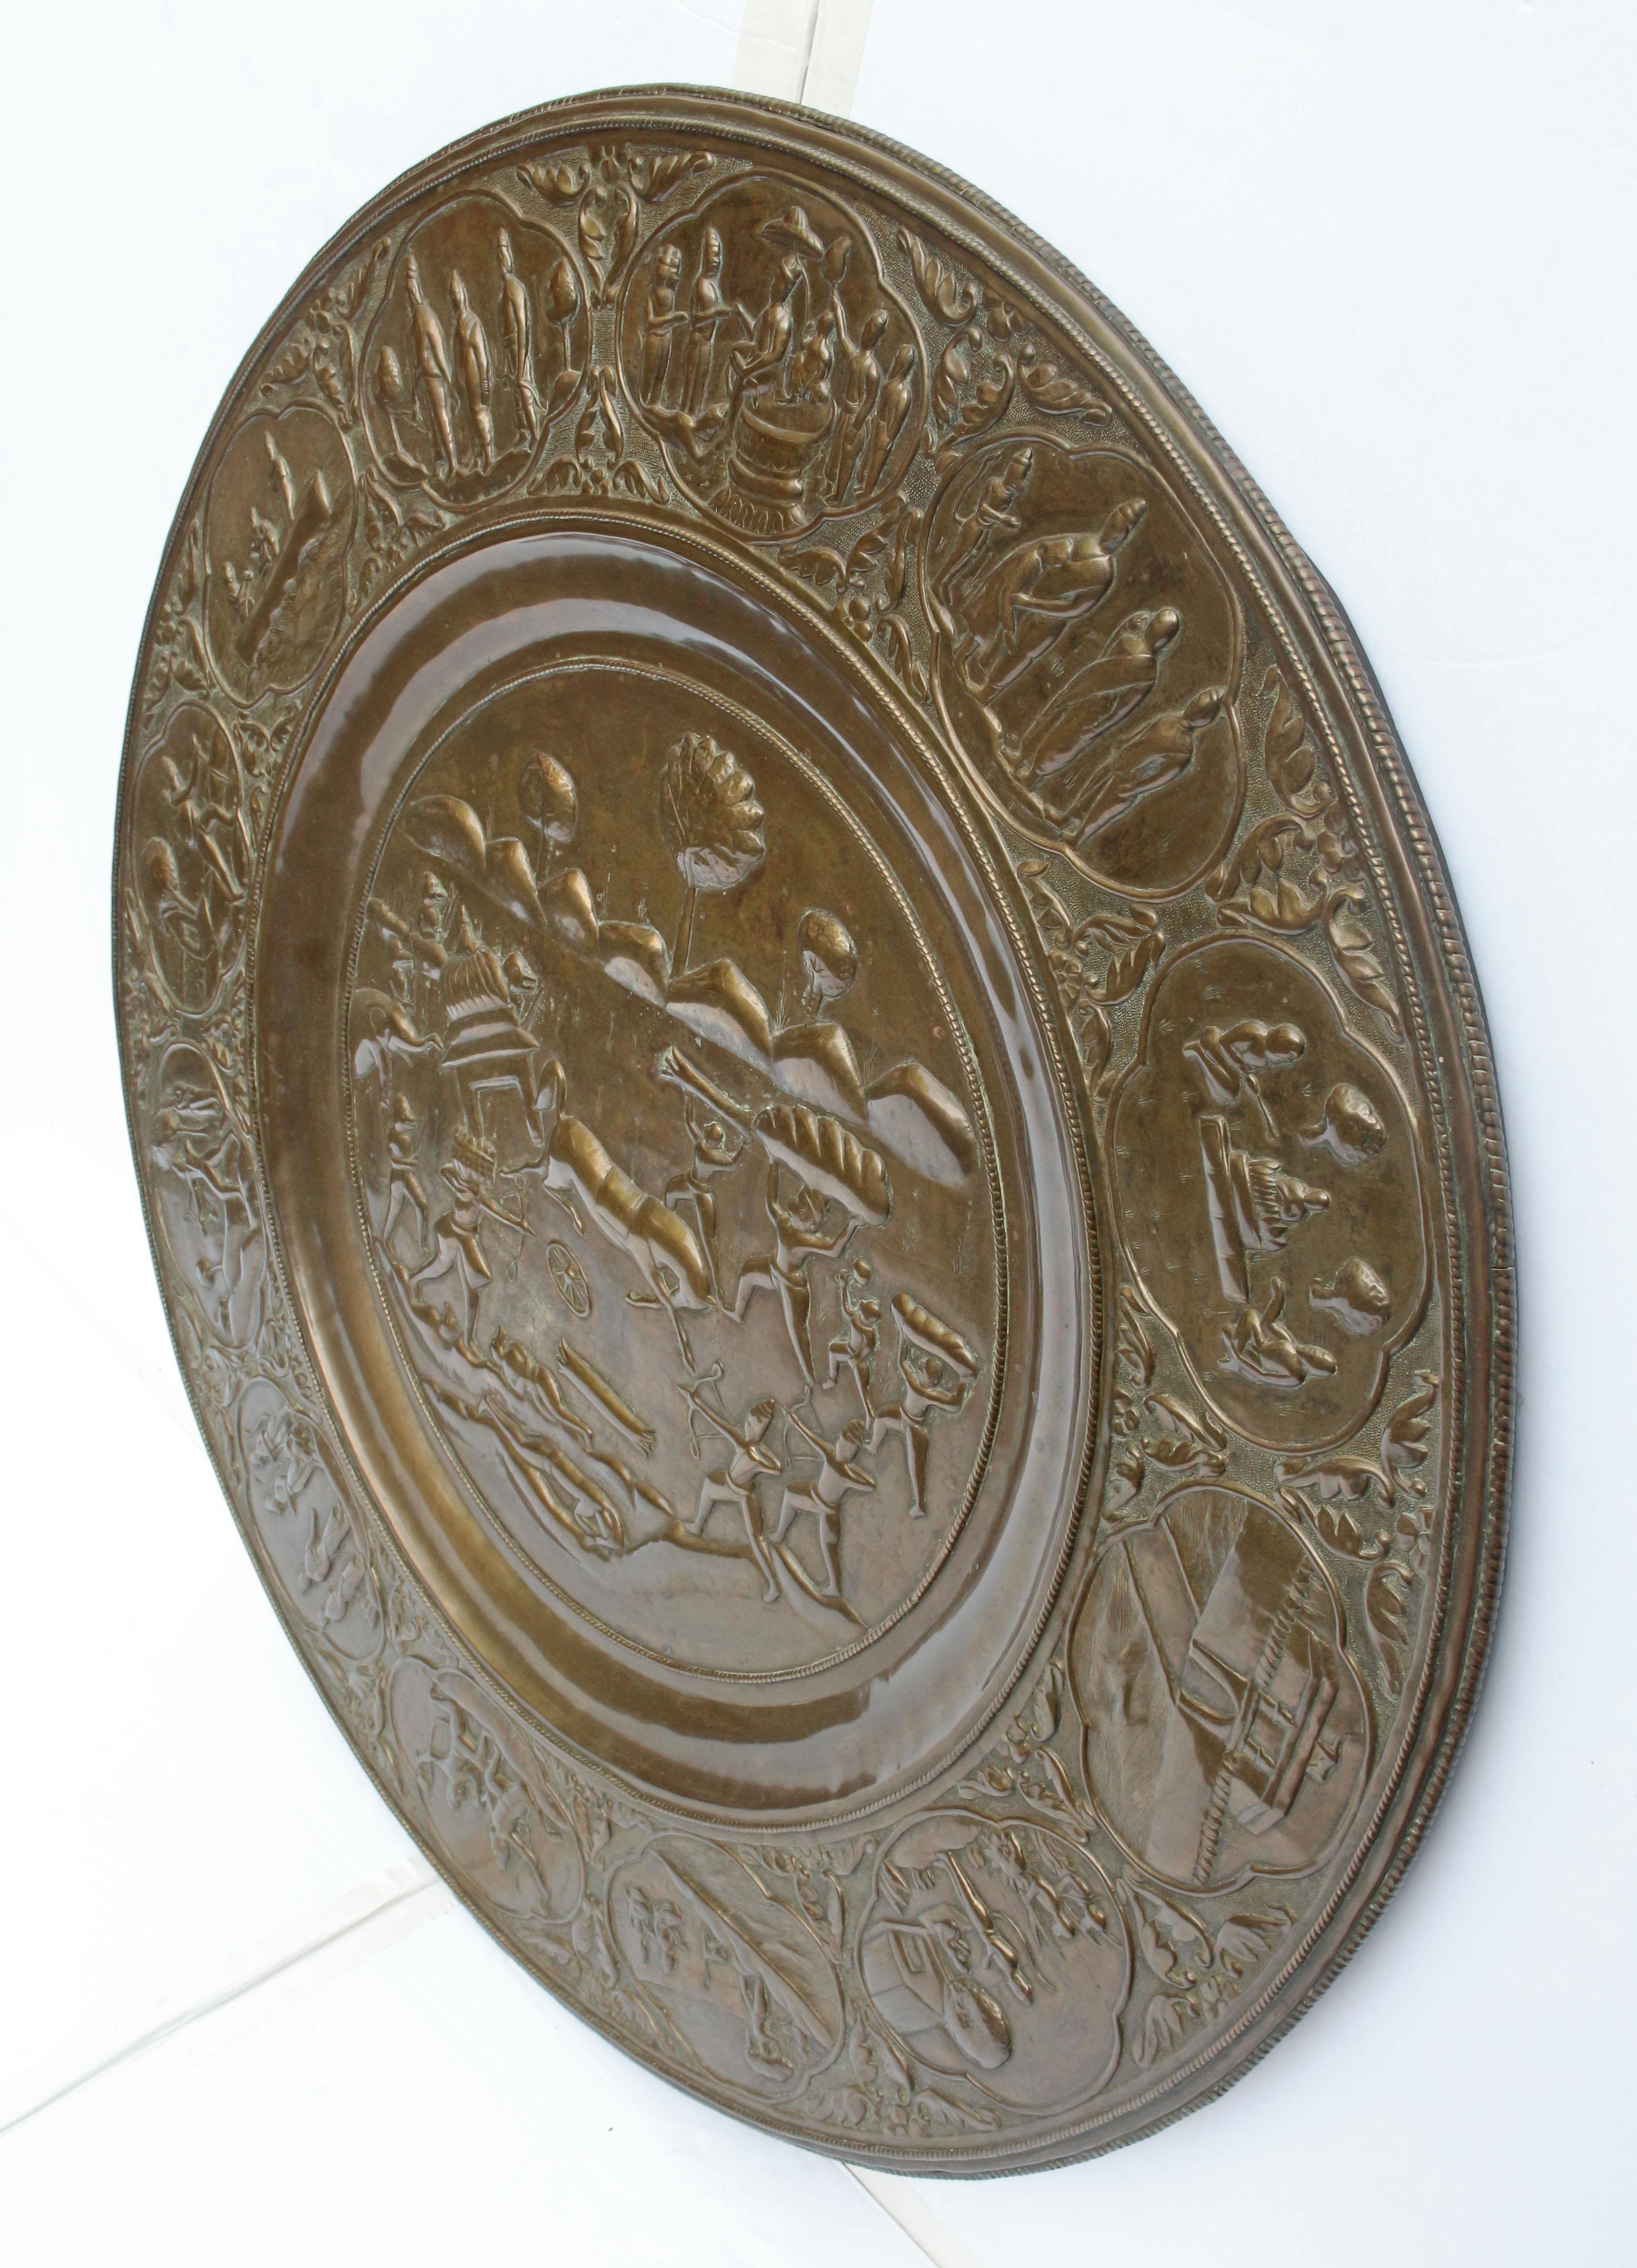 A splendid Indian or Siamese patinated brass disc, the scenes depicting the epic poem of the Hindu deity Rama. If Siamese, it depicts the Annanese adoption of the Ramayana in the late 18th drama depicting the event. The central panel is war waged by